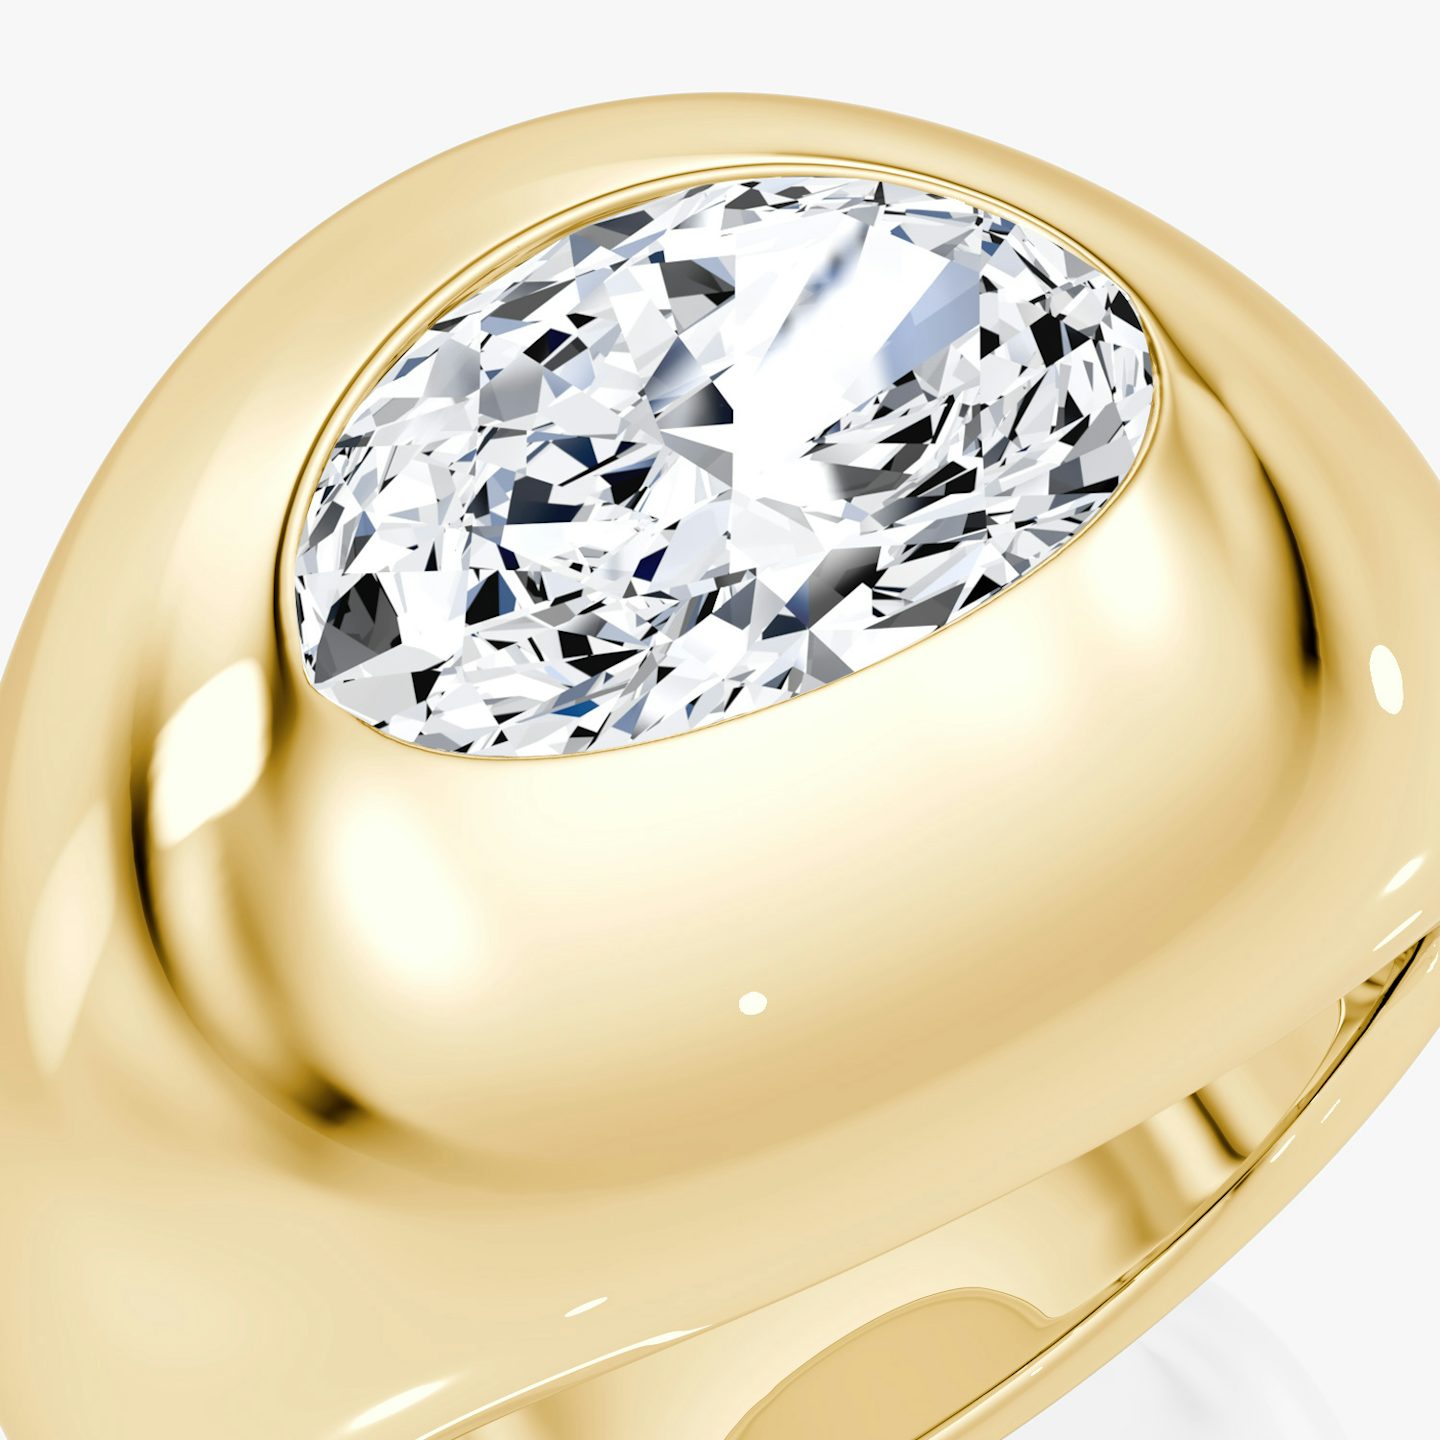 Bague Oval Dome | Ovale | 14k | Or jaune 18 carats